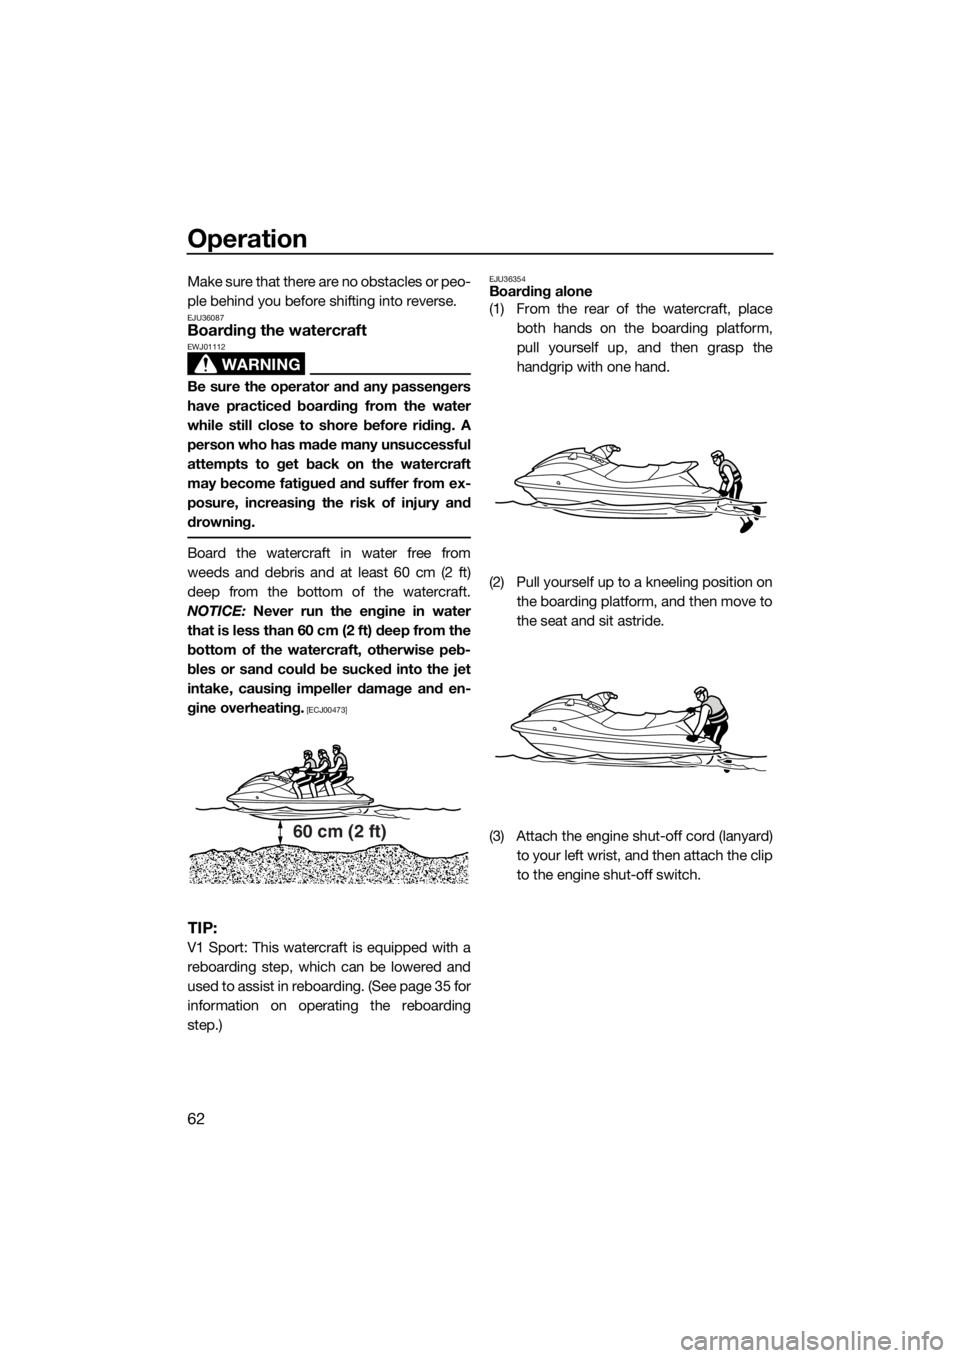 YAMAHA V1 2015  Owners Manual Operation
62
Make sure that there are no obstacles or peo-
ple behind you before shifting into reverse.
EJU36087Boarding the watercraft
WARNING
EWJ01112
Be sure the operator and any passengers
have pr